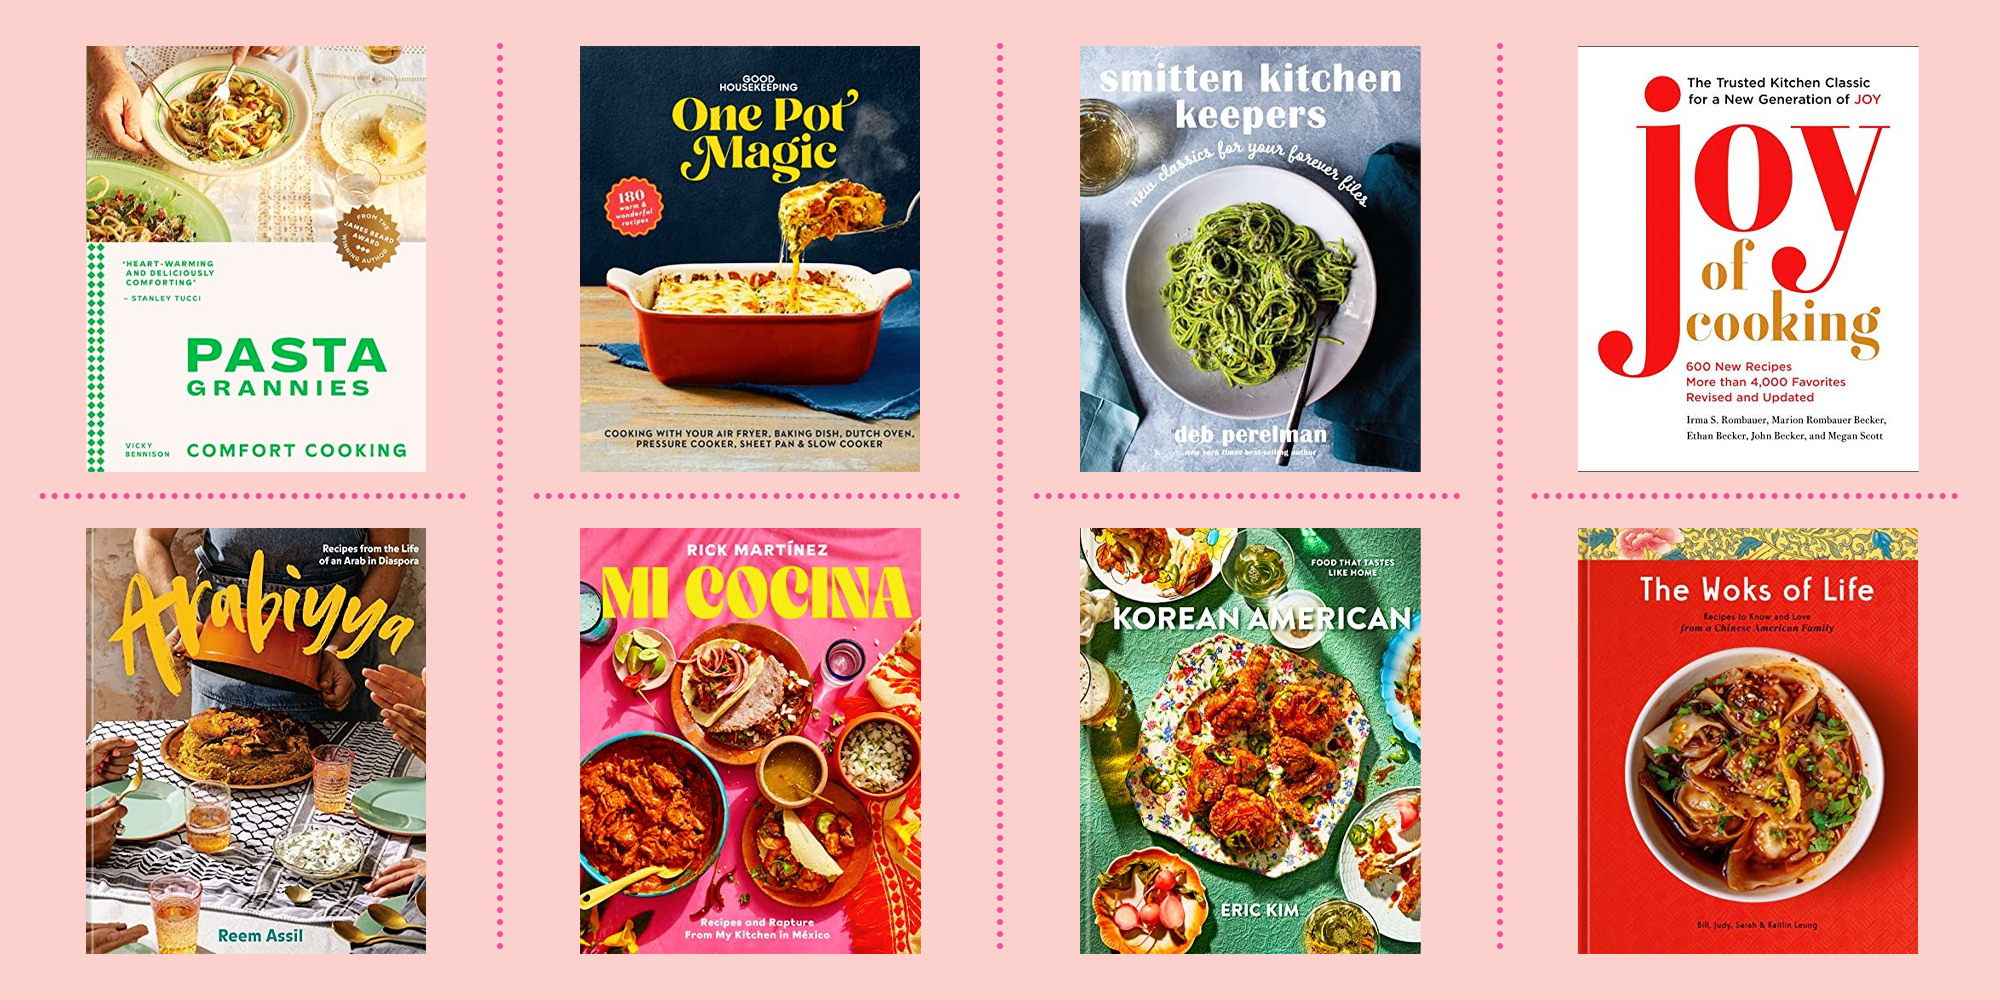 OXO For Life - Cooking With Books